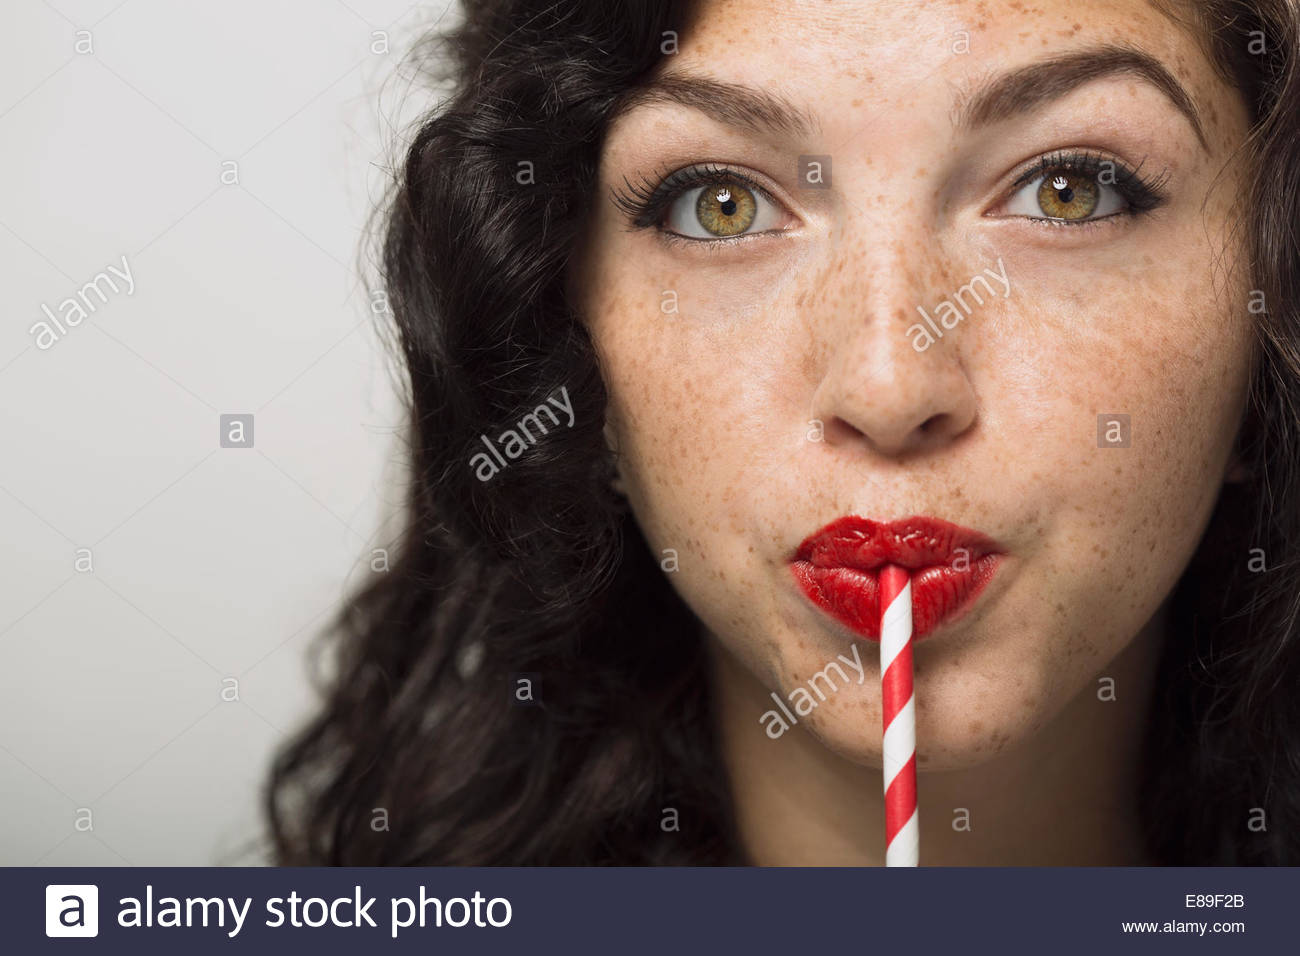 Portrait of woman with freckles drinking from straw Stock Photo